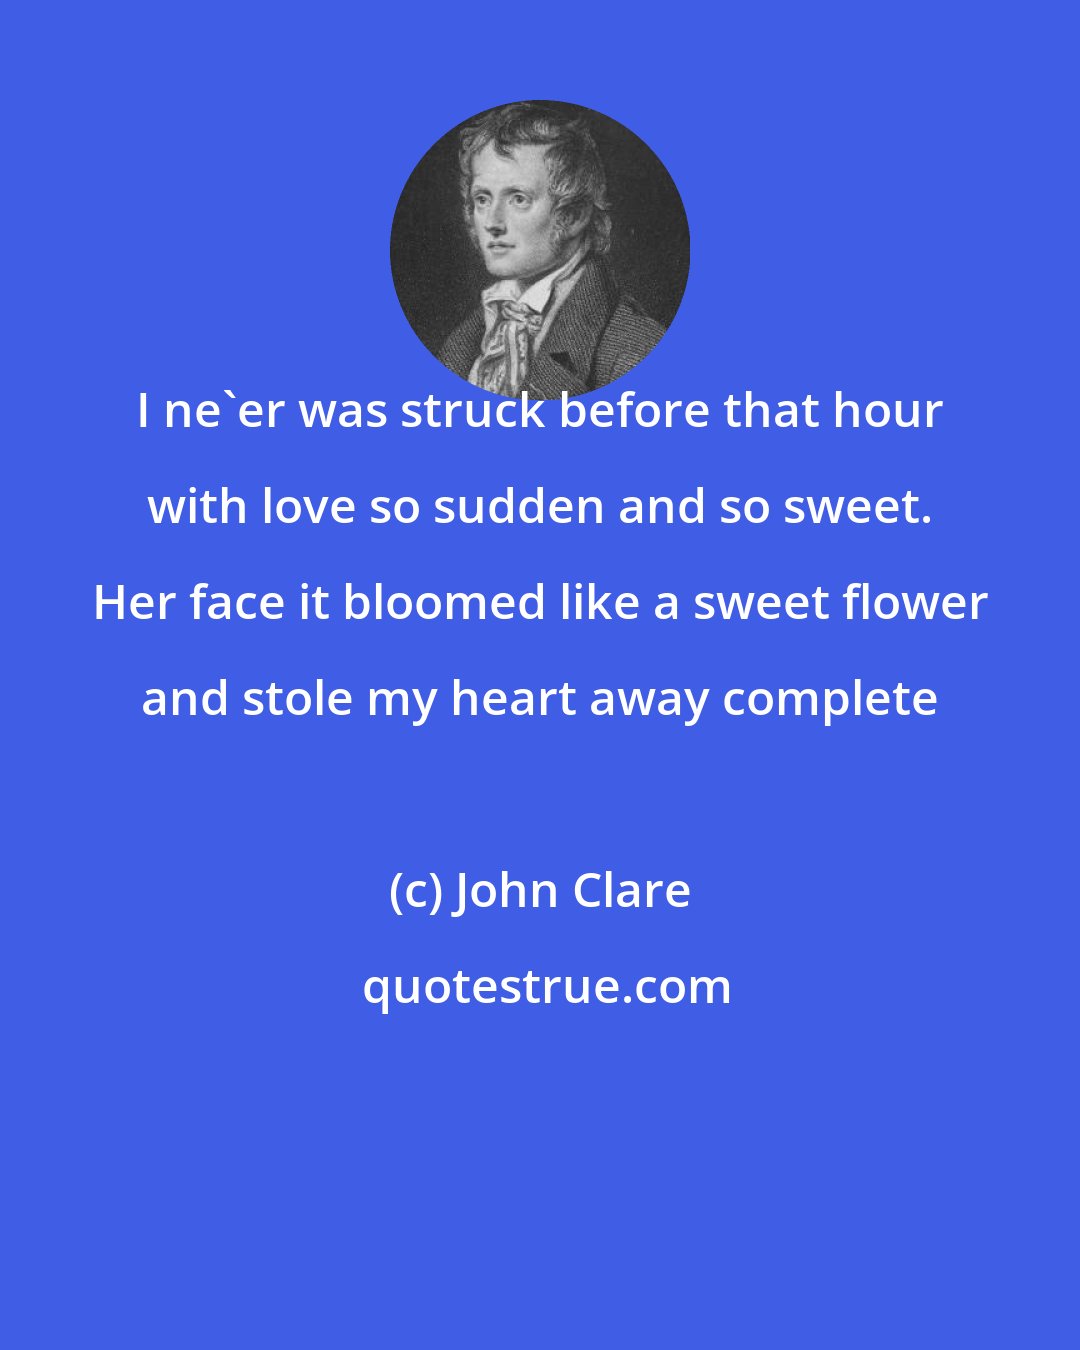 John Clare: I ne'er was struck before that hour with love so sudden and so sweet. Her face it bloomed like a sweet flower and stole my heart away complete